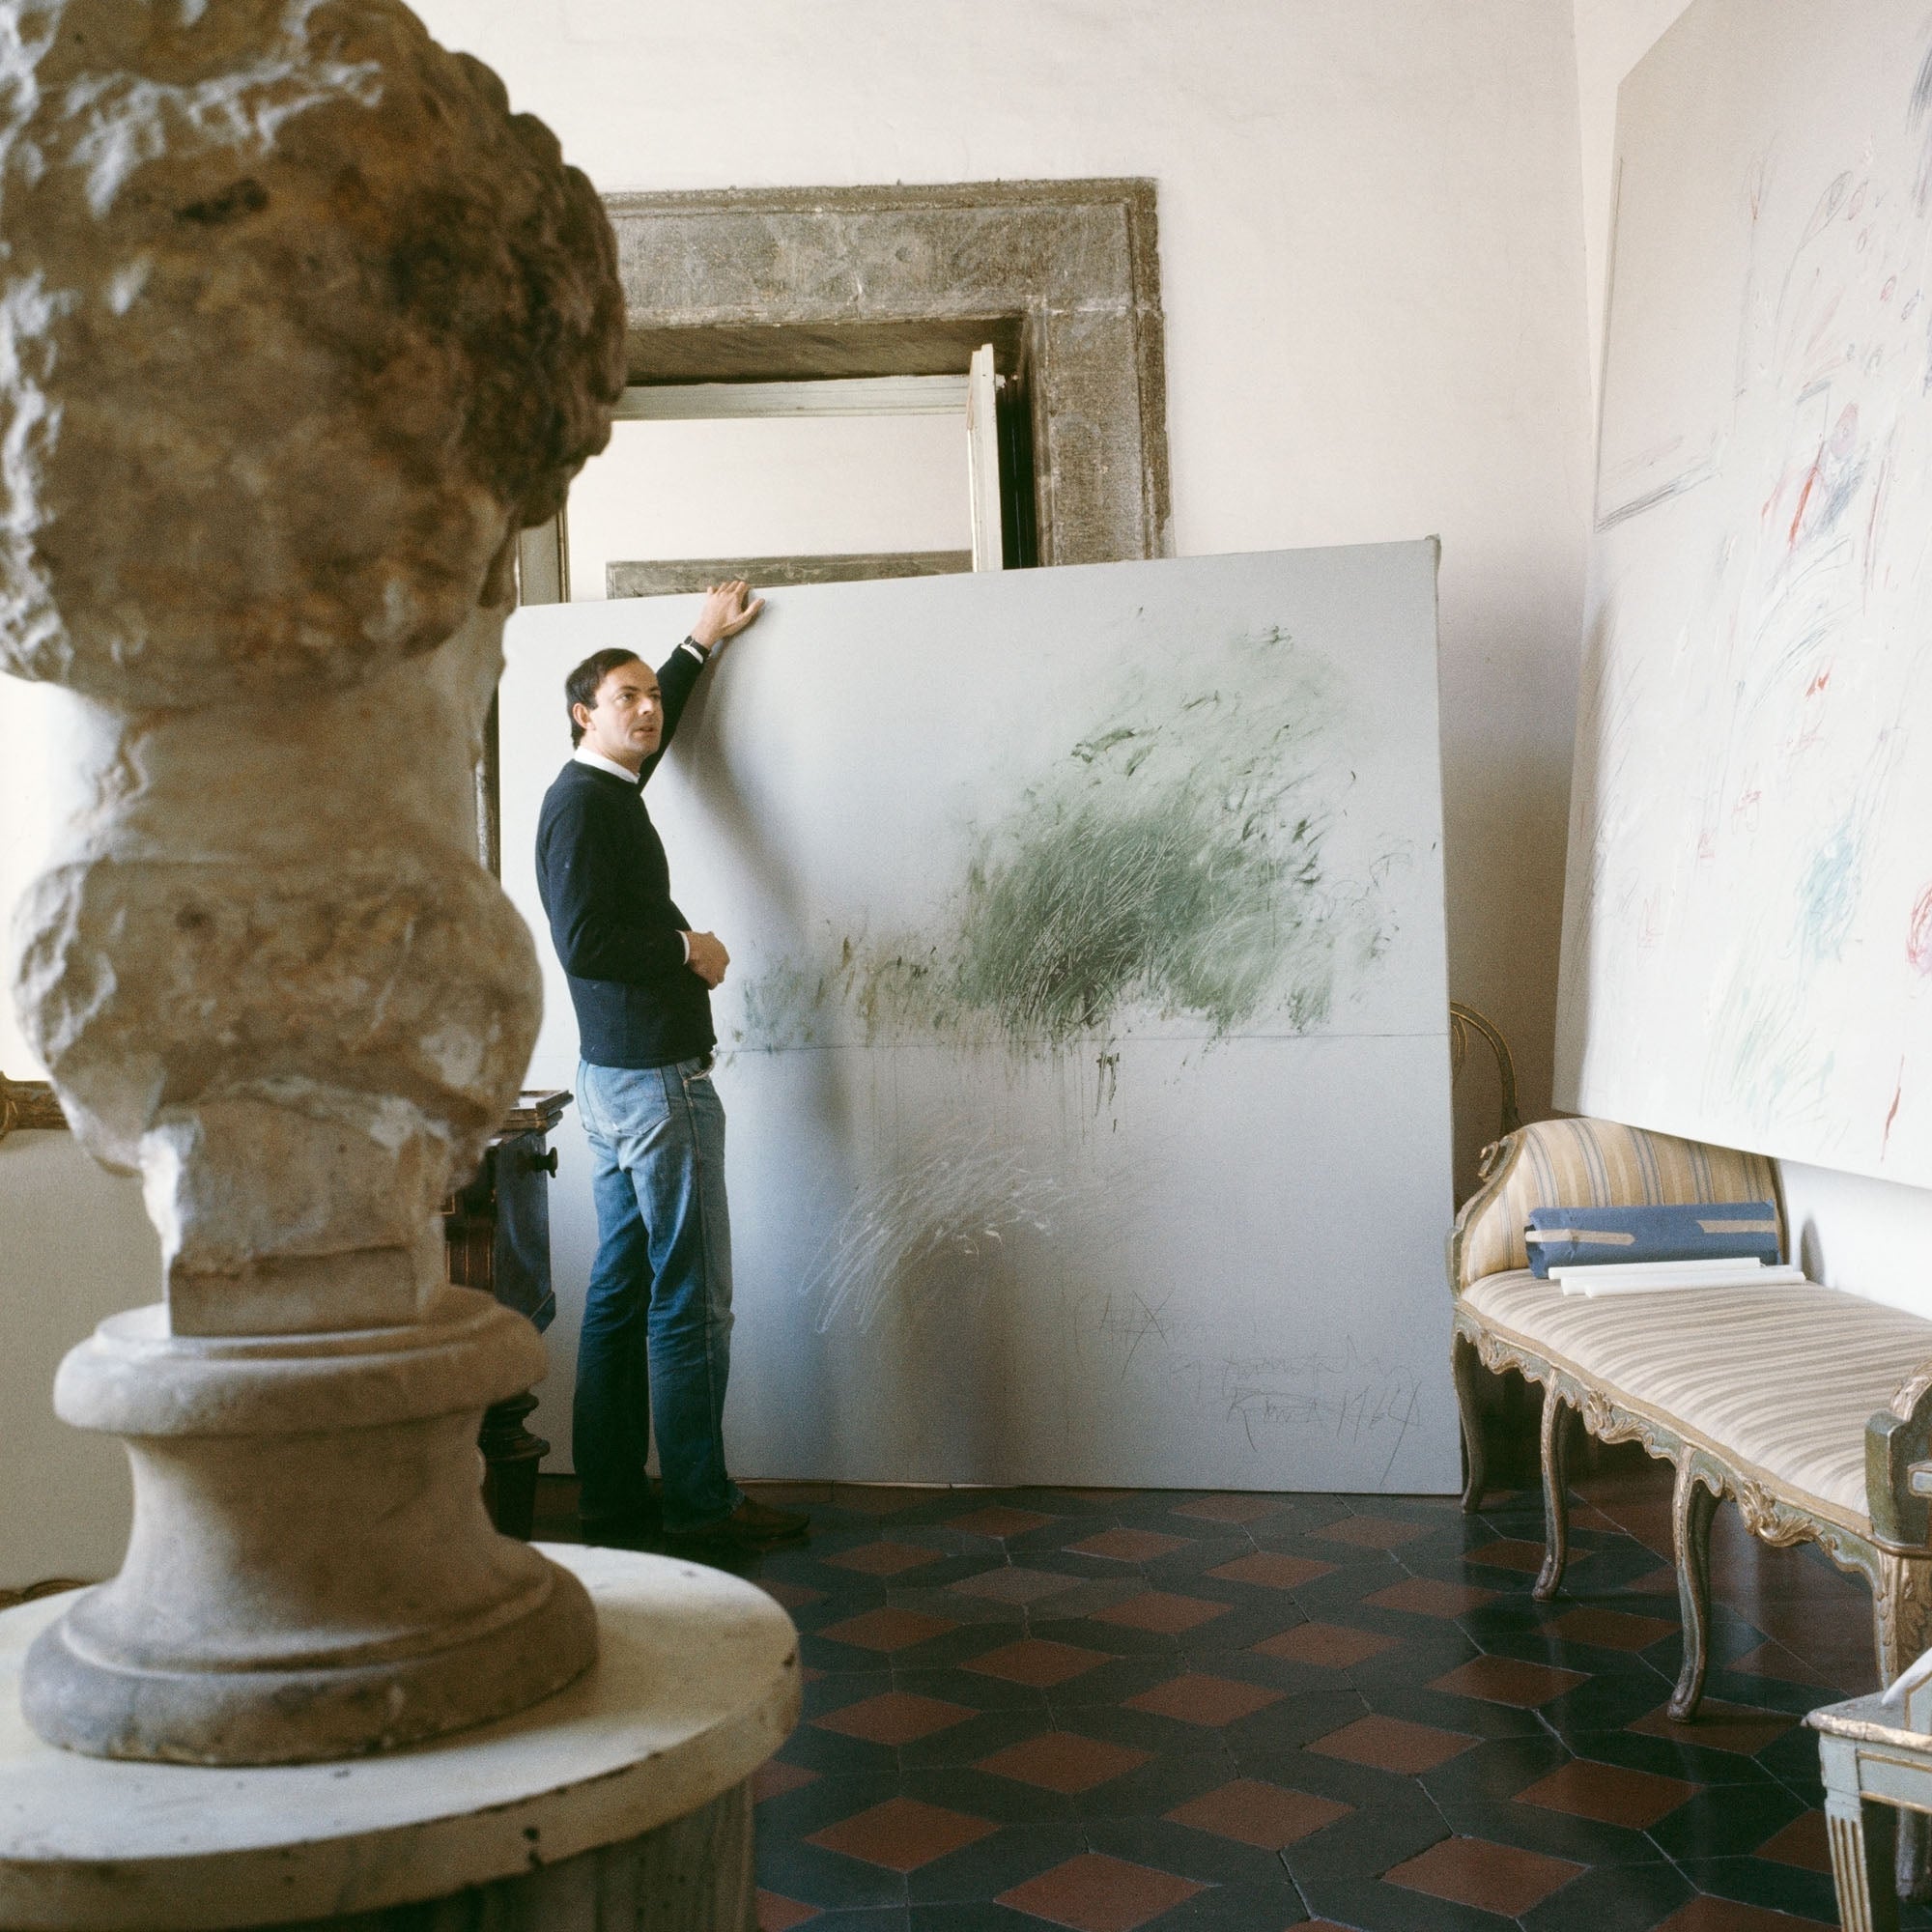 Cy Twombly in Rome 1966 - Untitled #24.